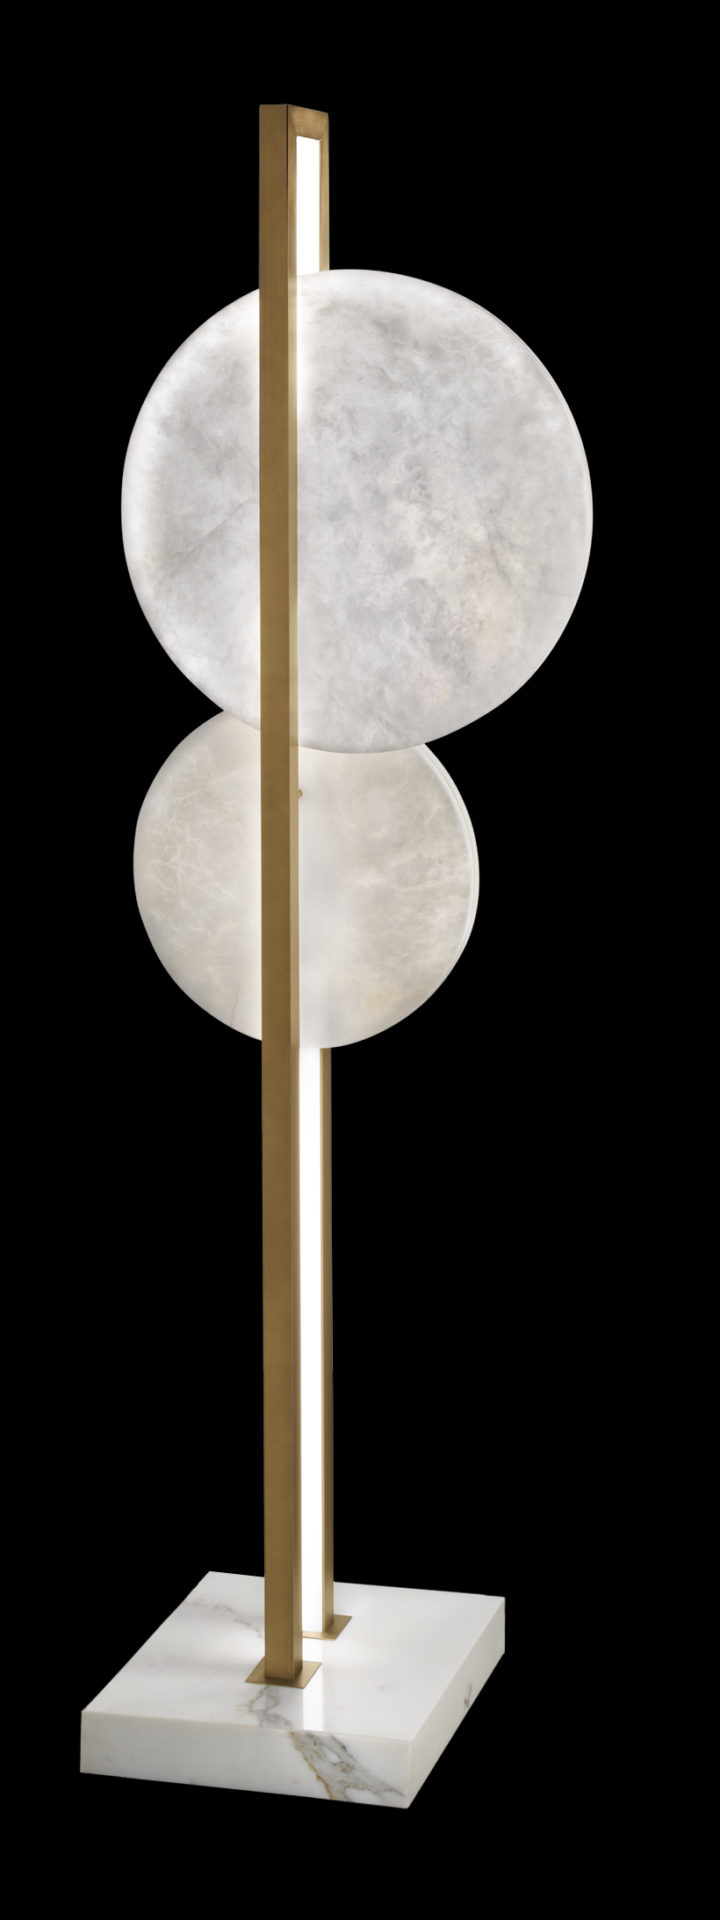 Floor lamp from the Luna Nuova collection by Patrizia Volpato